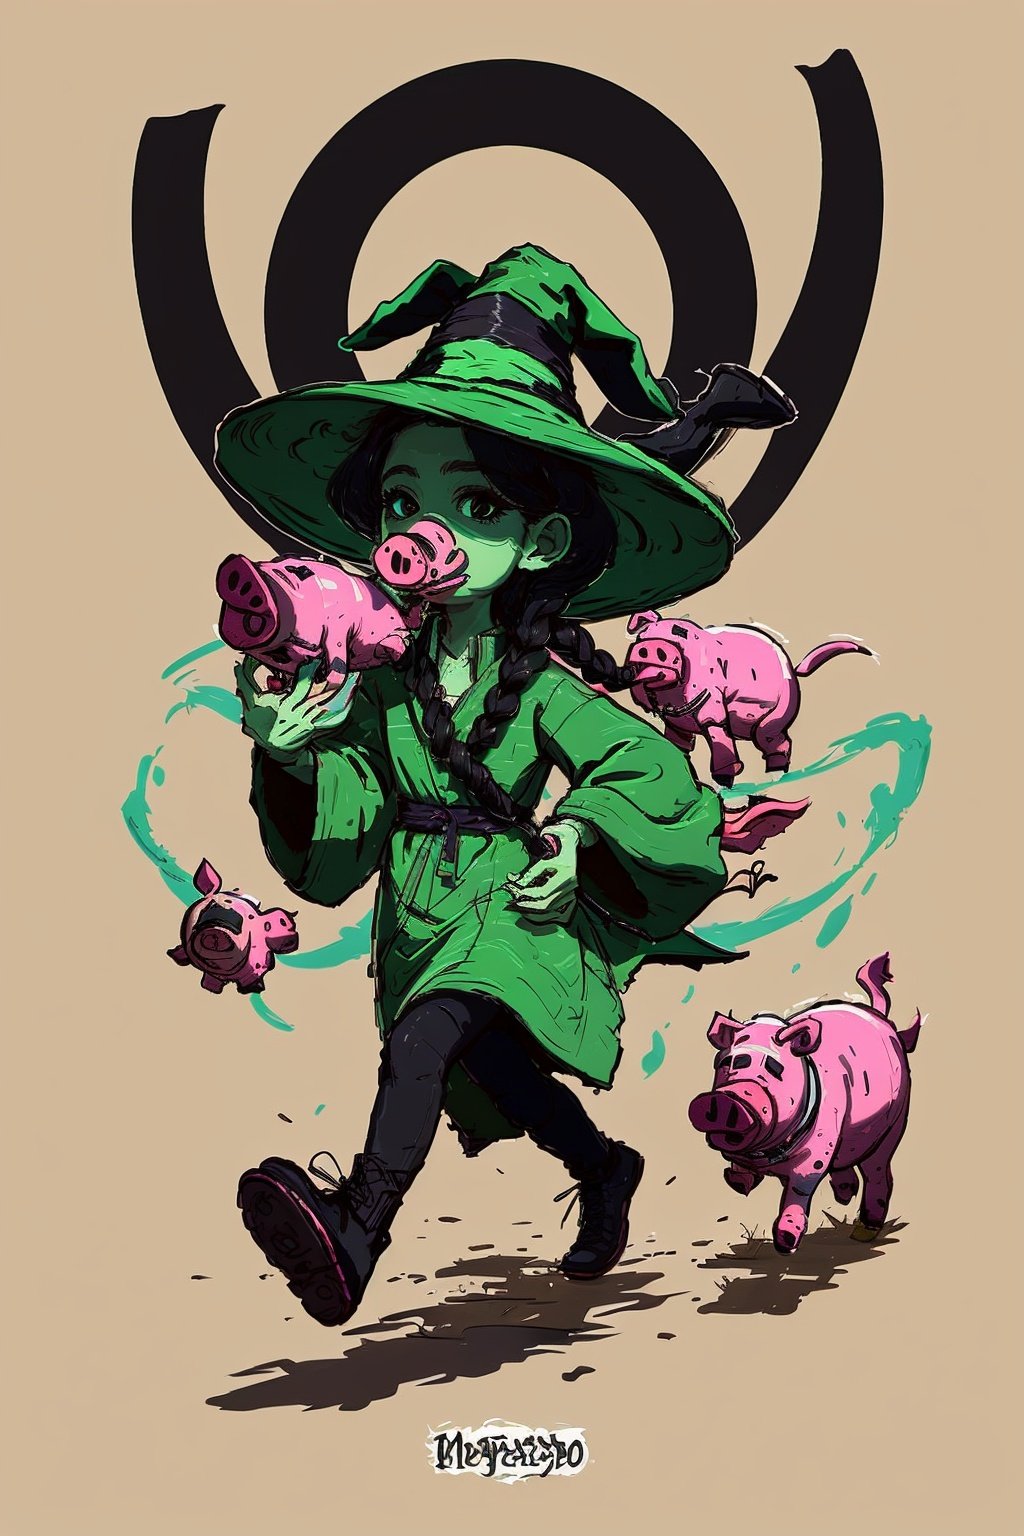 (masterpiece, best quality:1.5)<lora:EpicLogo-000008:0.8>, EpicLogo, ((running on a pig)), shining eyes, twin_braid, black hair, little girl, 10 years old, simple green witch's big hat and green robe, intricate details, 32k digital painting, 